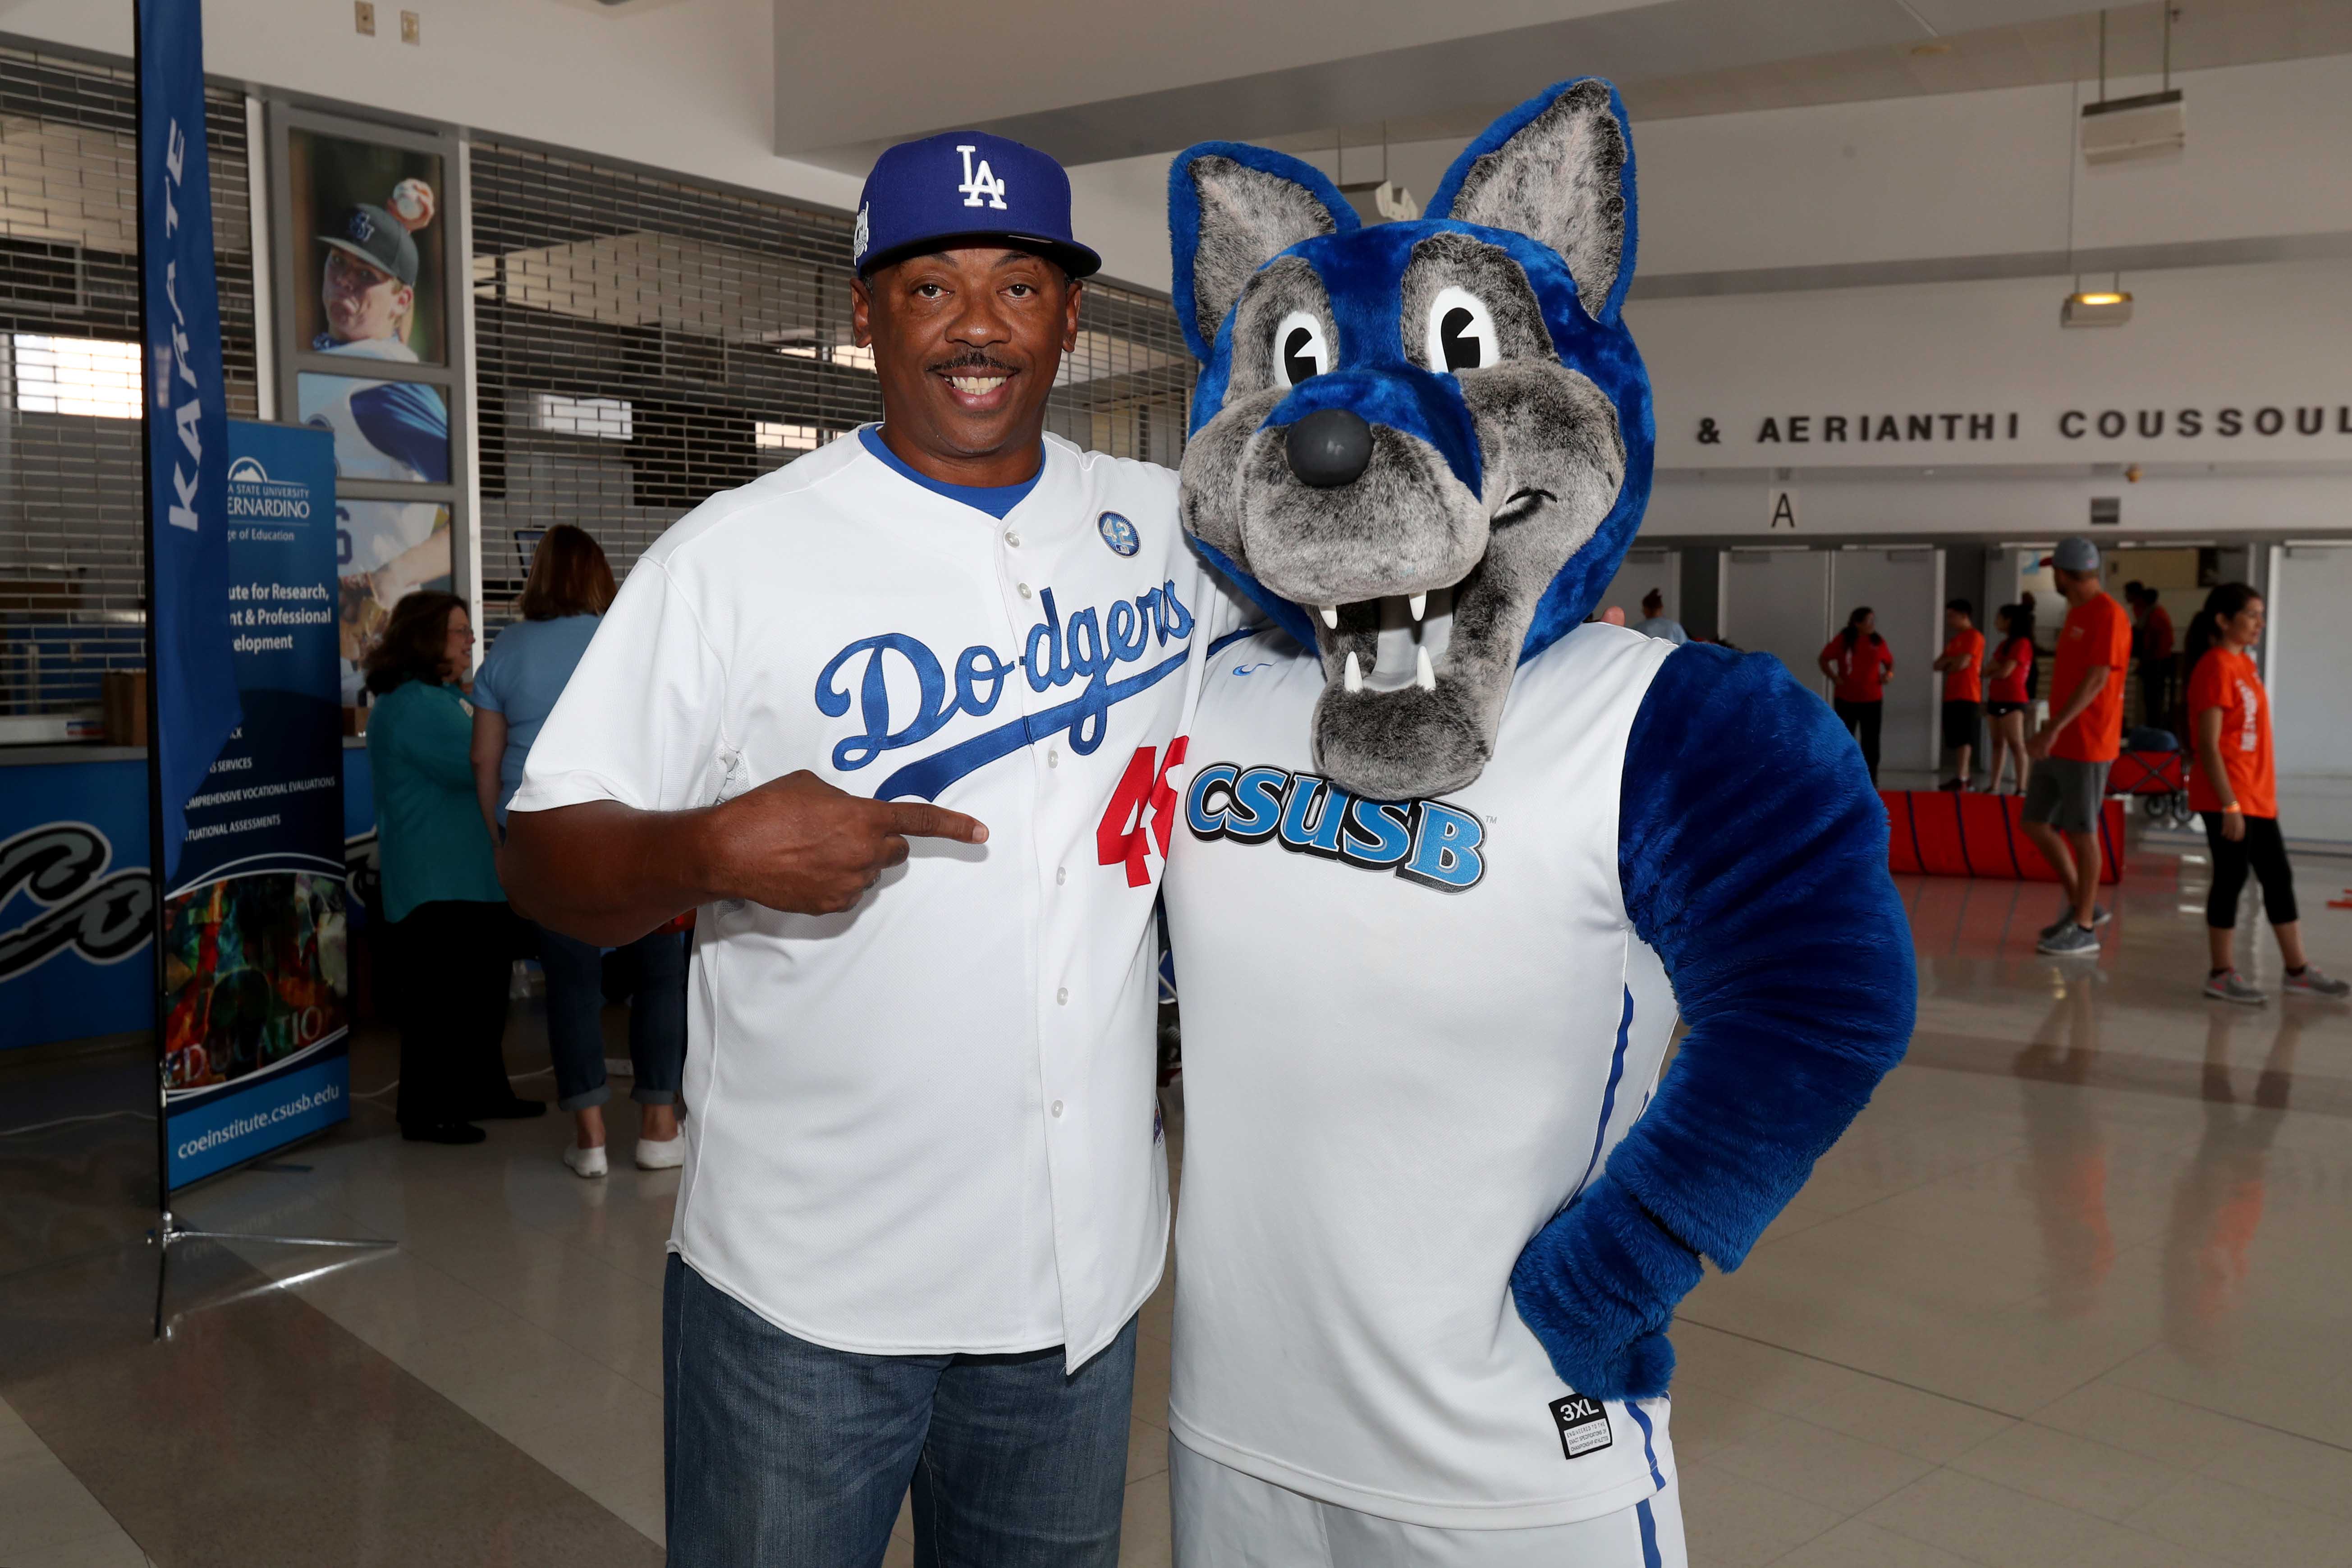 Dennis Powell, who pitched for the Los Angeles Dodgers from 1983-87, will open the DisABILITY Sports Festival at Cal State San Bernardino on Saturday, Oct. 6